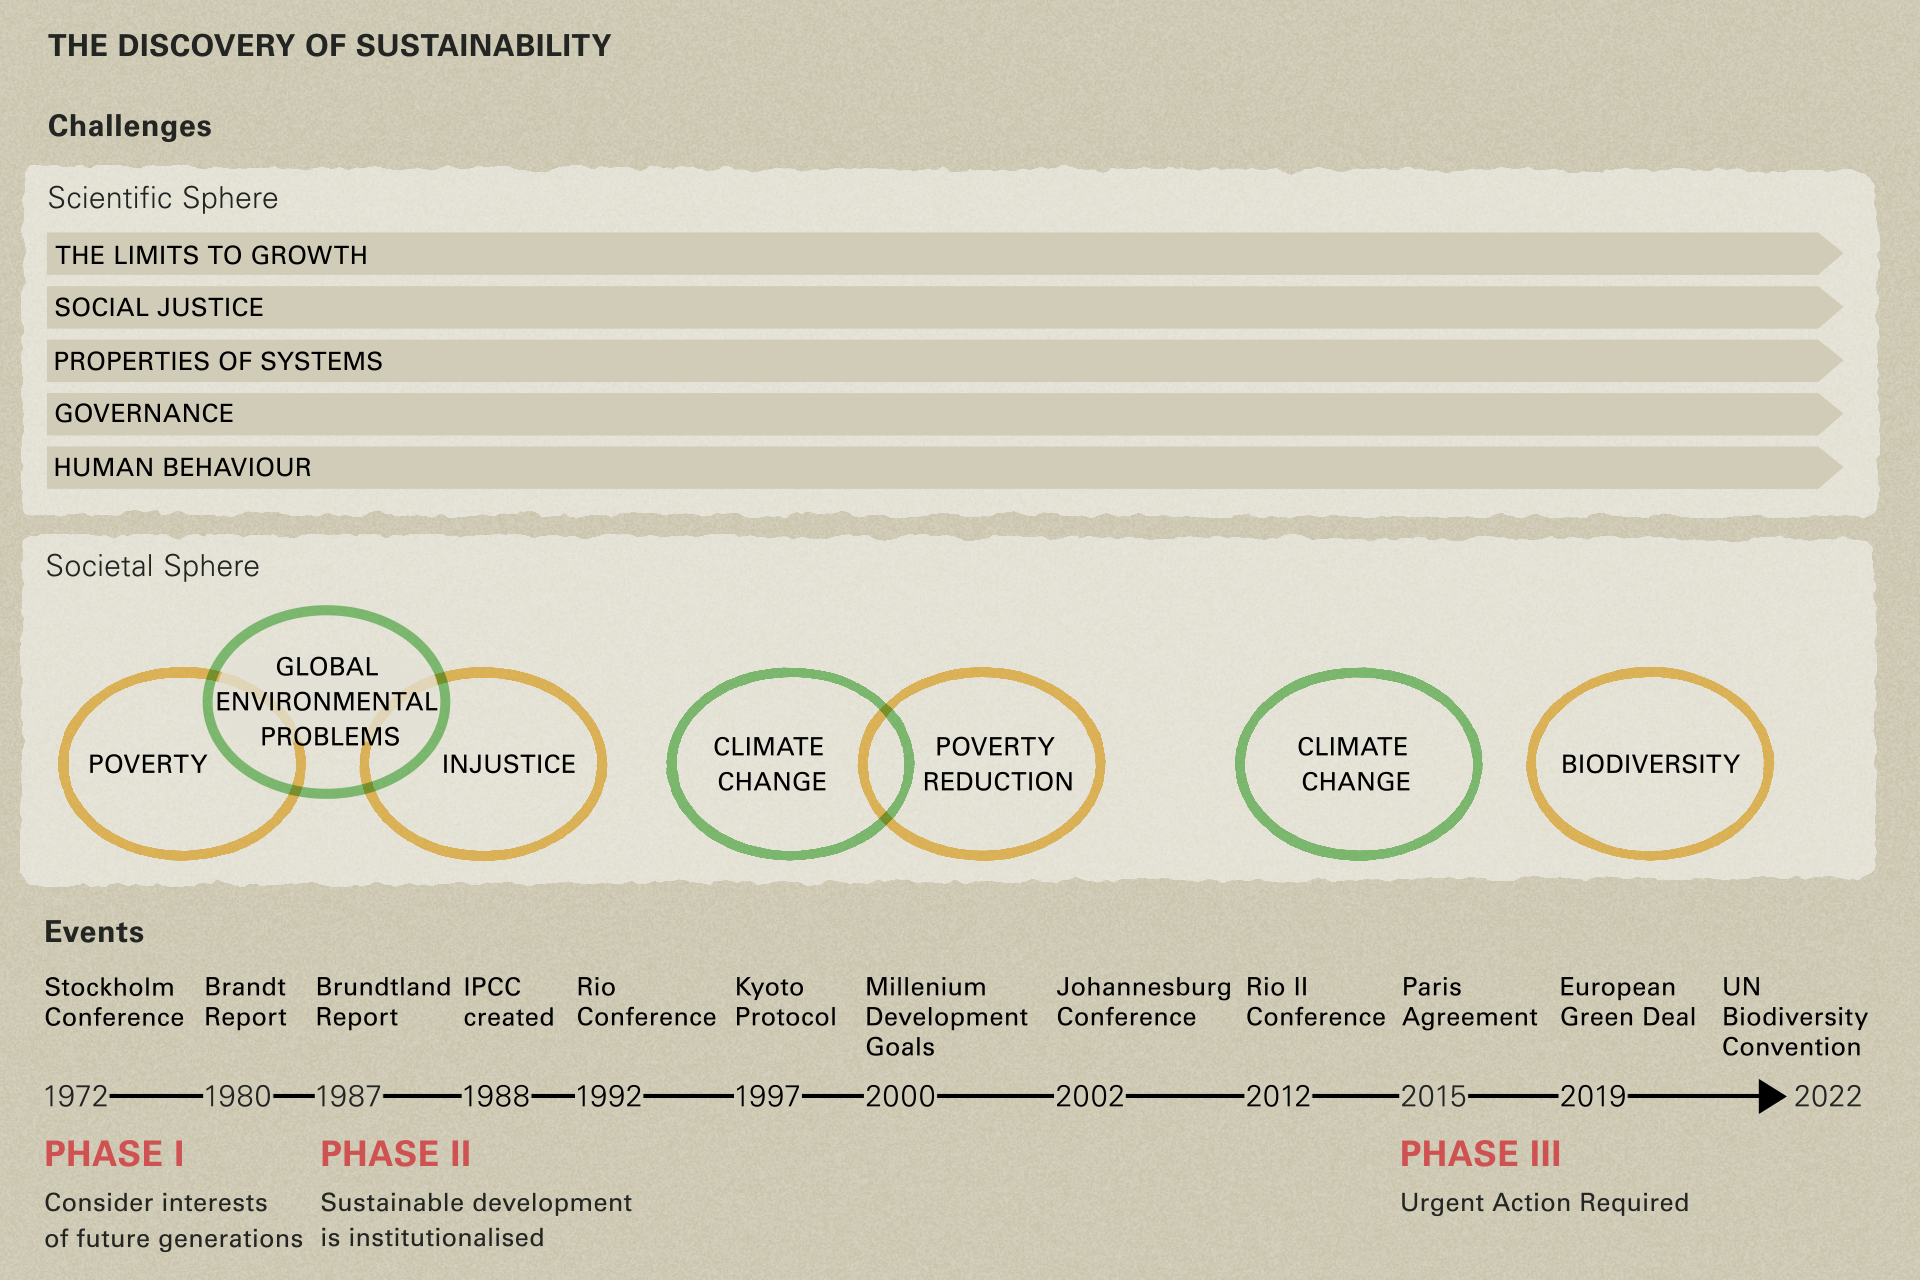 Diagram showing an overview of “The Discovery of Sustainability” timeline, including challenges in the scientific and societal spheres as well as the events since 1972.